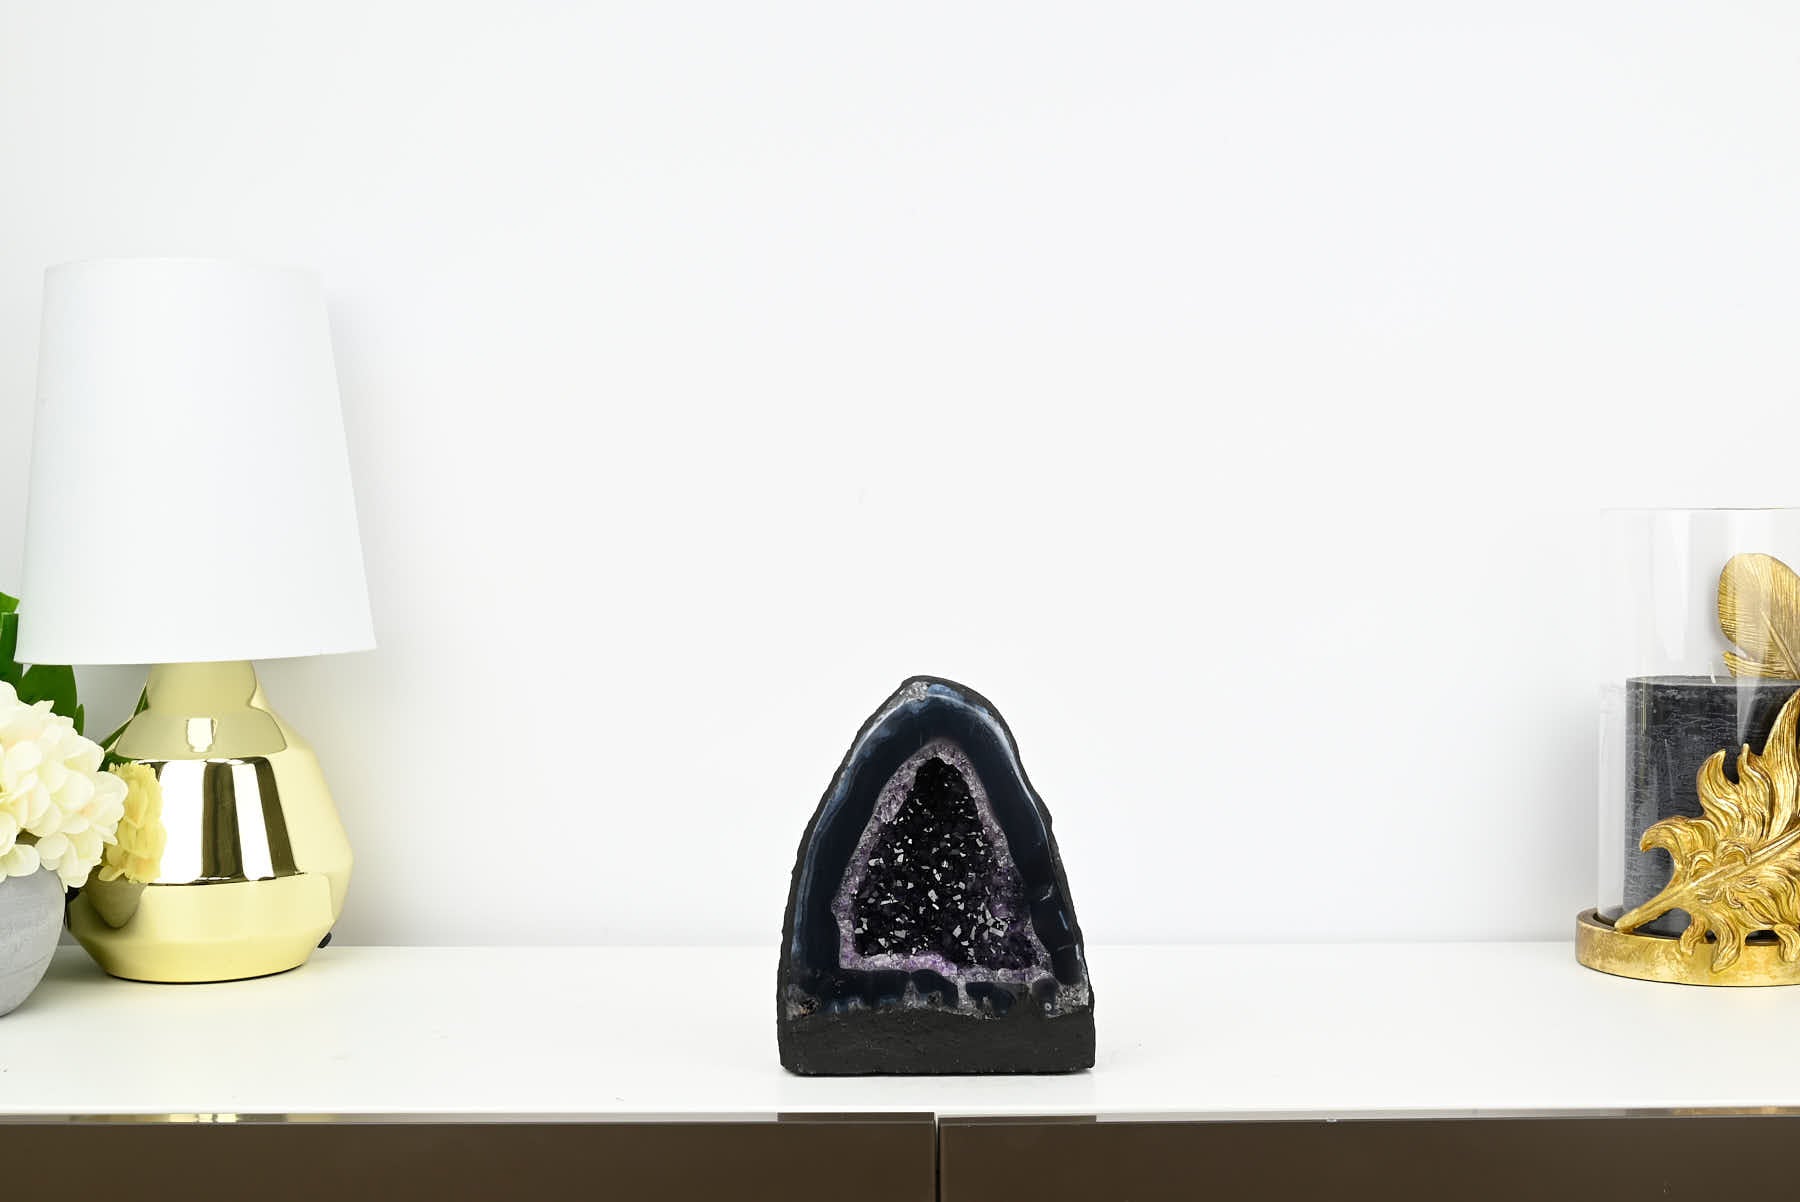 Extra Quality Amethyst Cathedral - 2.66kg, 19cm tall - #CAAMET-10055